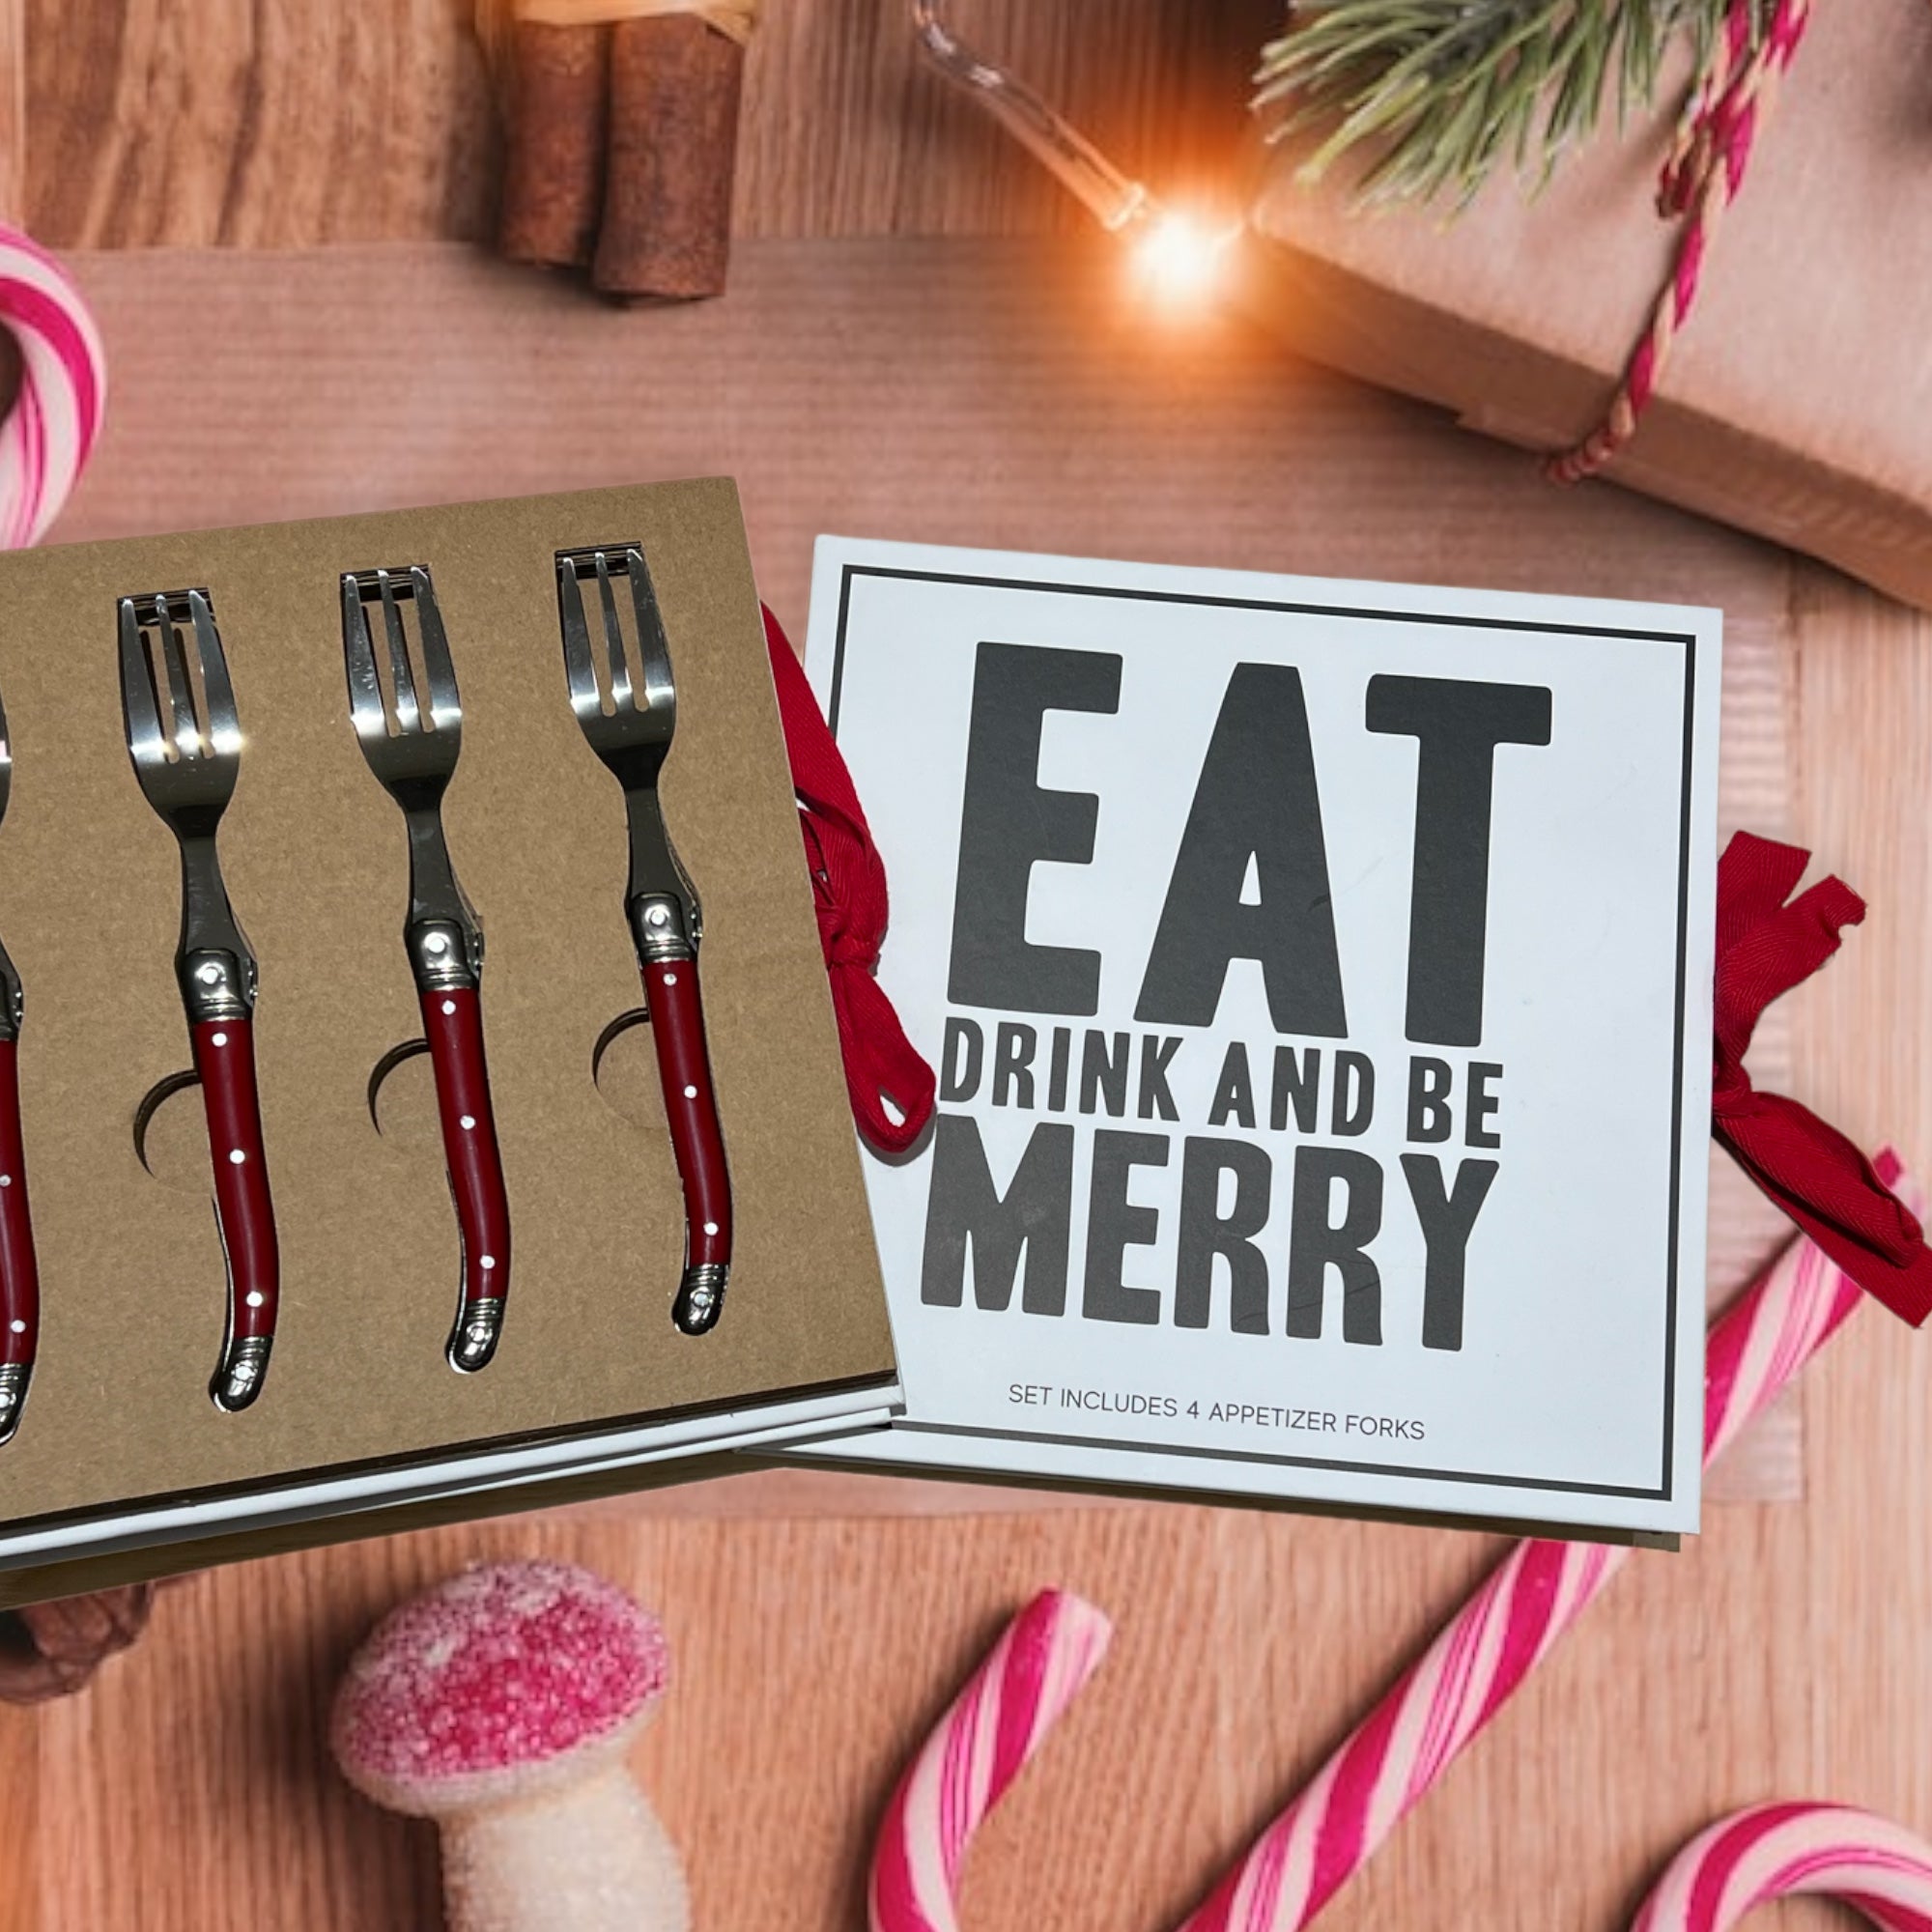 Eat Drink and Be Merry! Charcuterie Red Fork Set Gift Book - Entertaining Essential